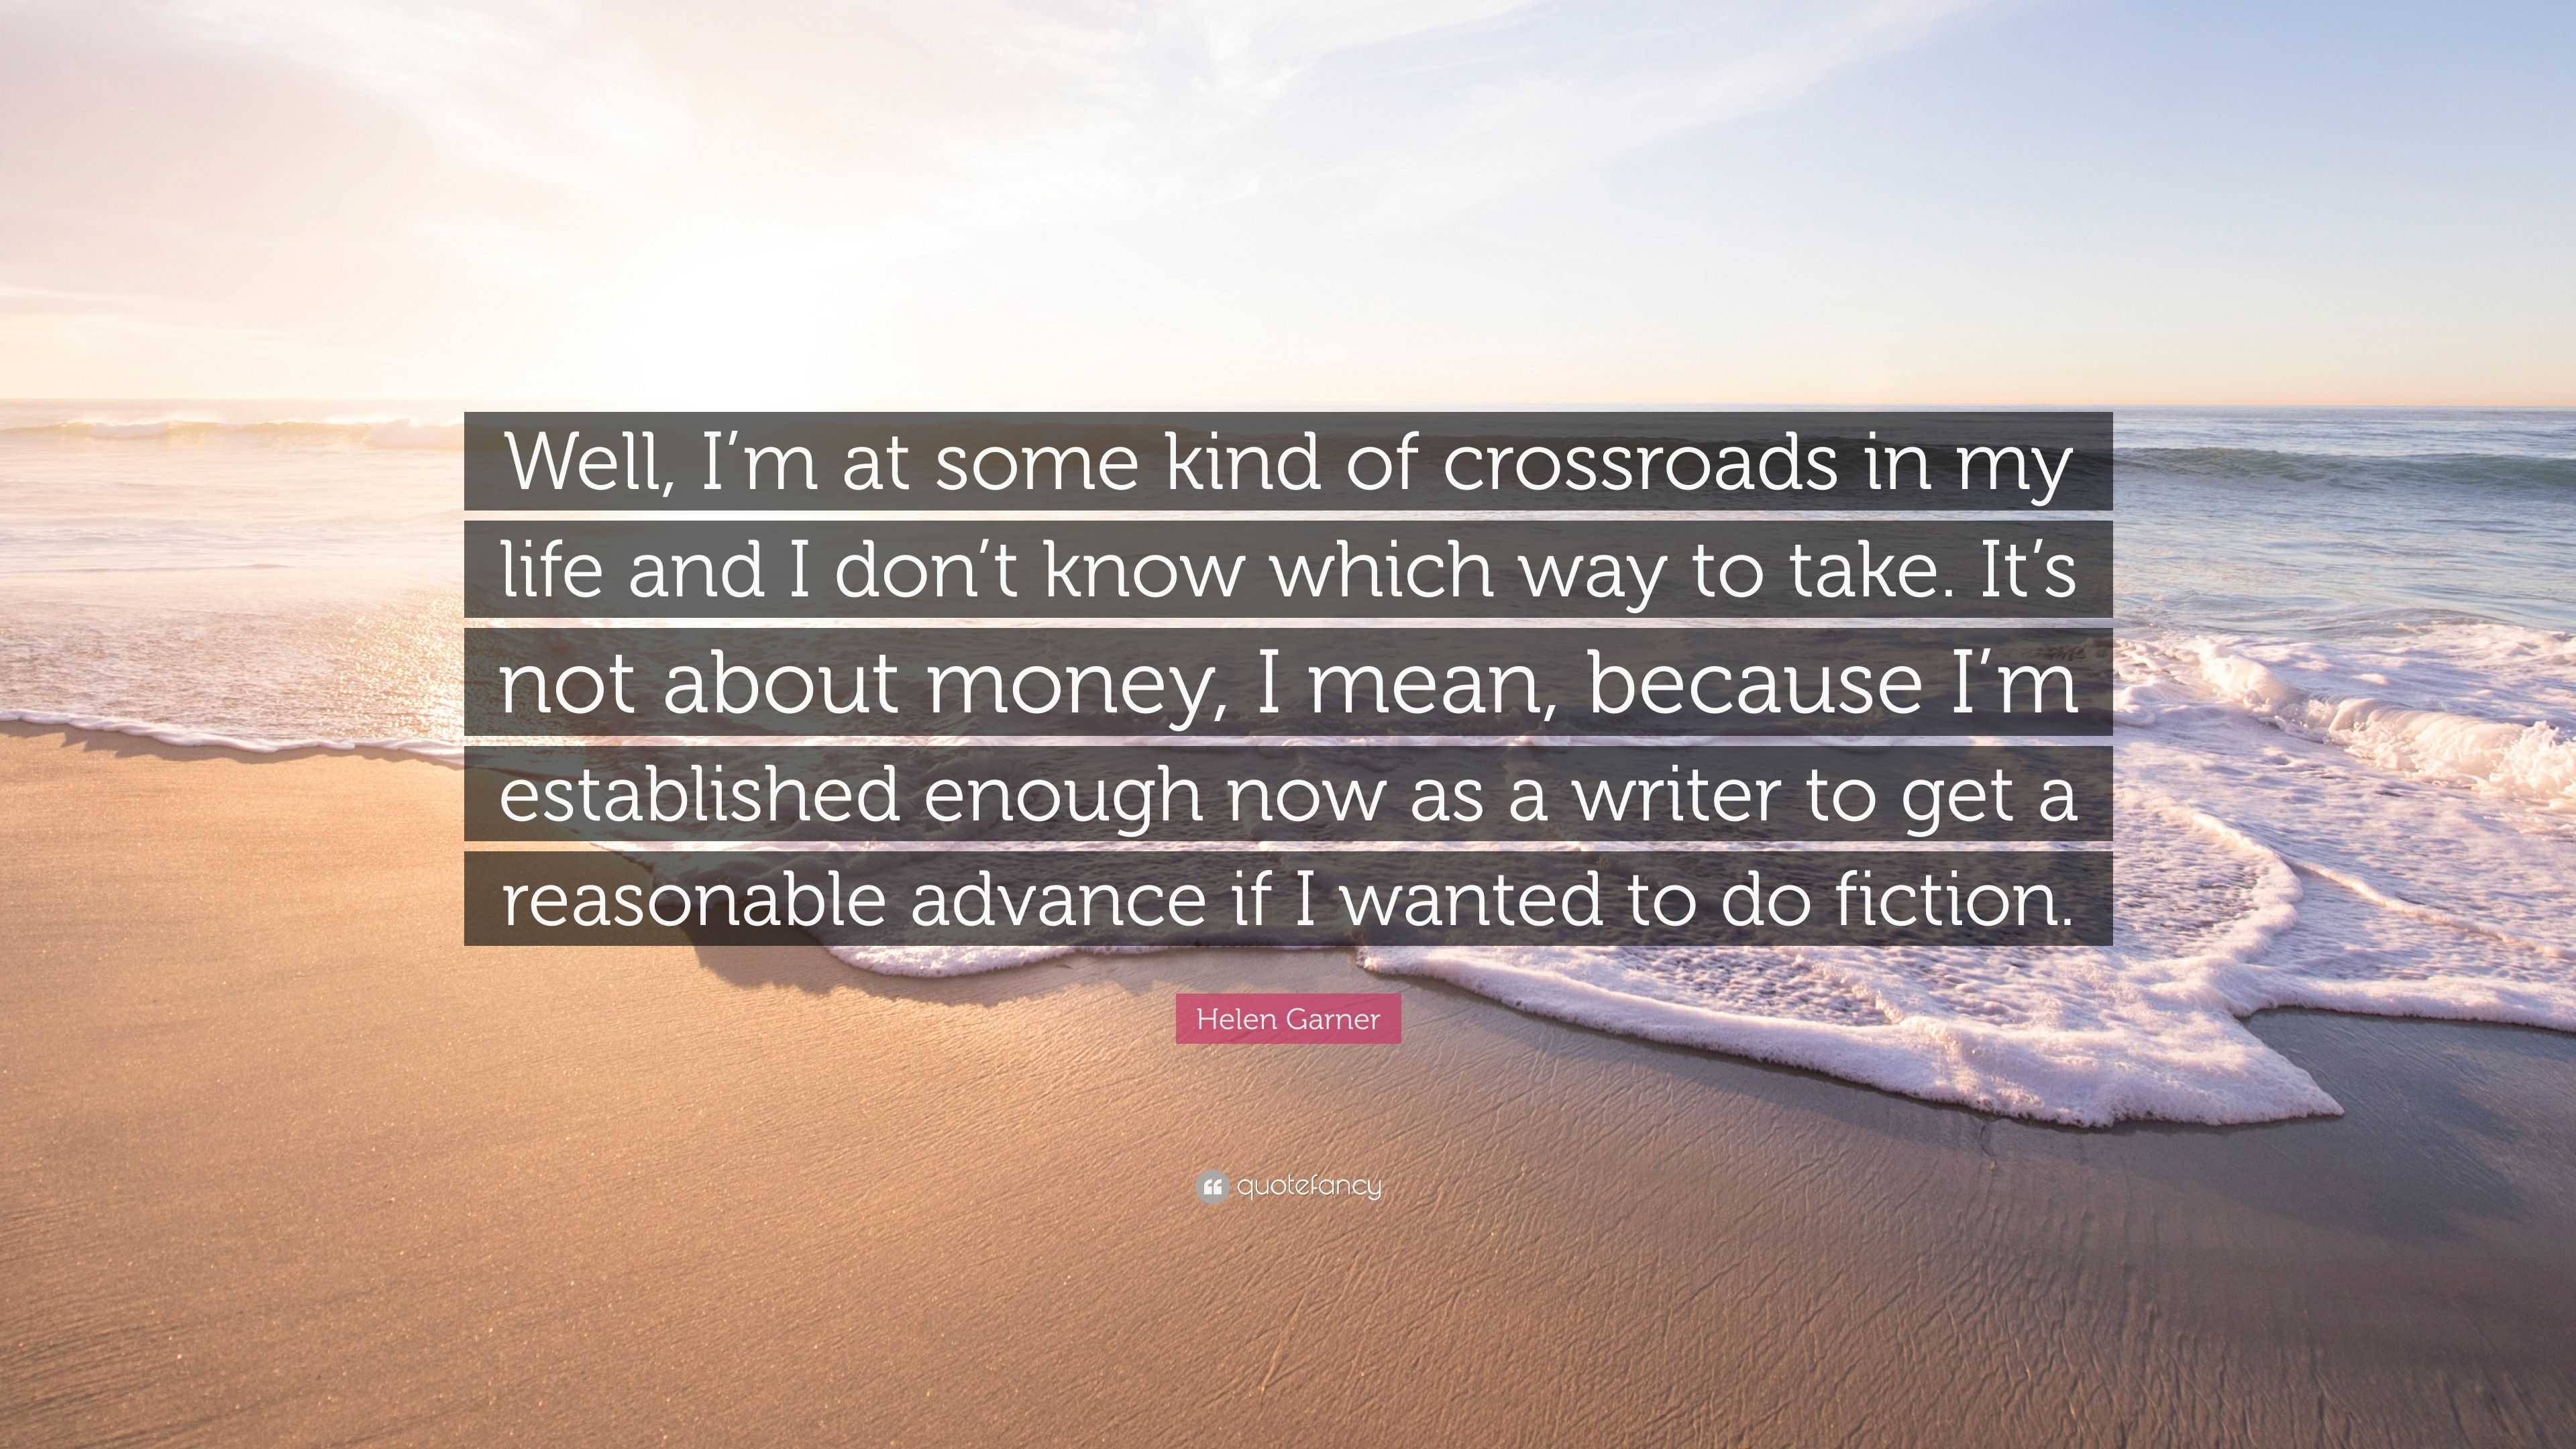 Helen Garner Quote: “Well, I'm at some kind of crossroads in my life and I  don't know which way to take. It's not about money, I mean, becaus”